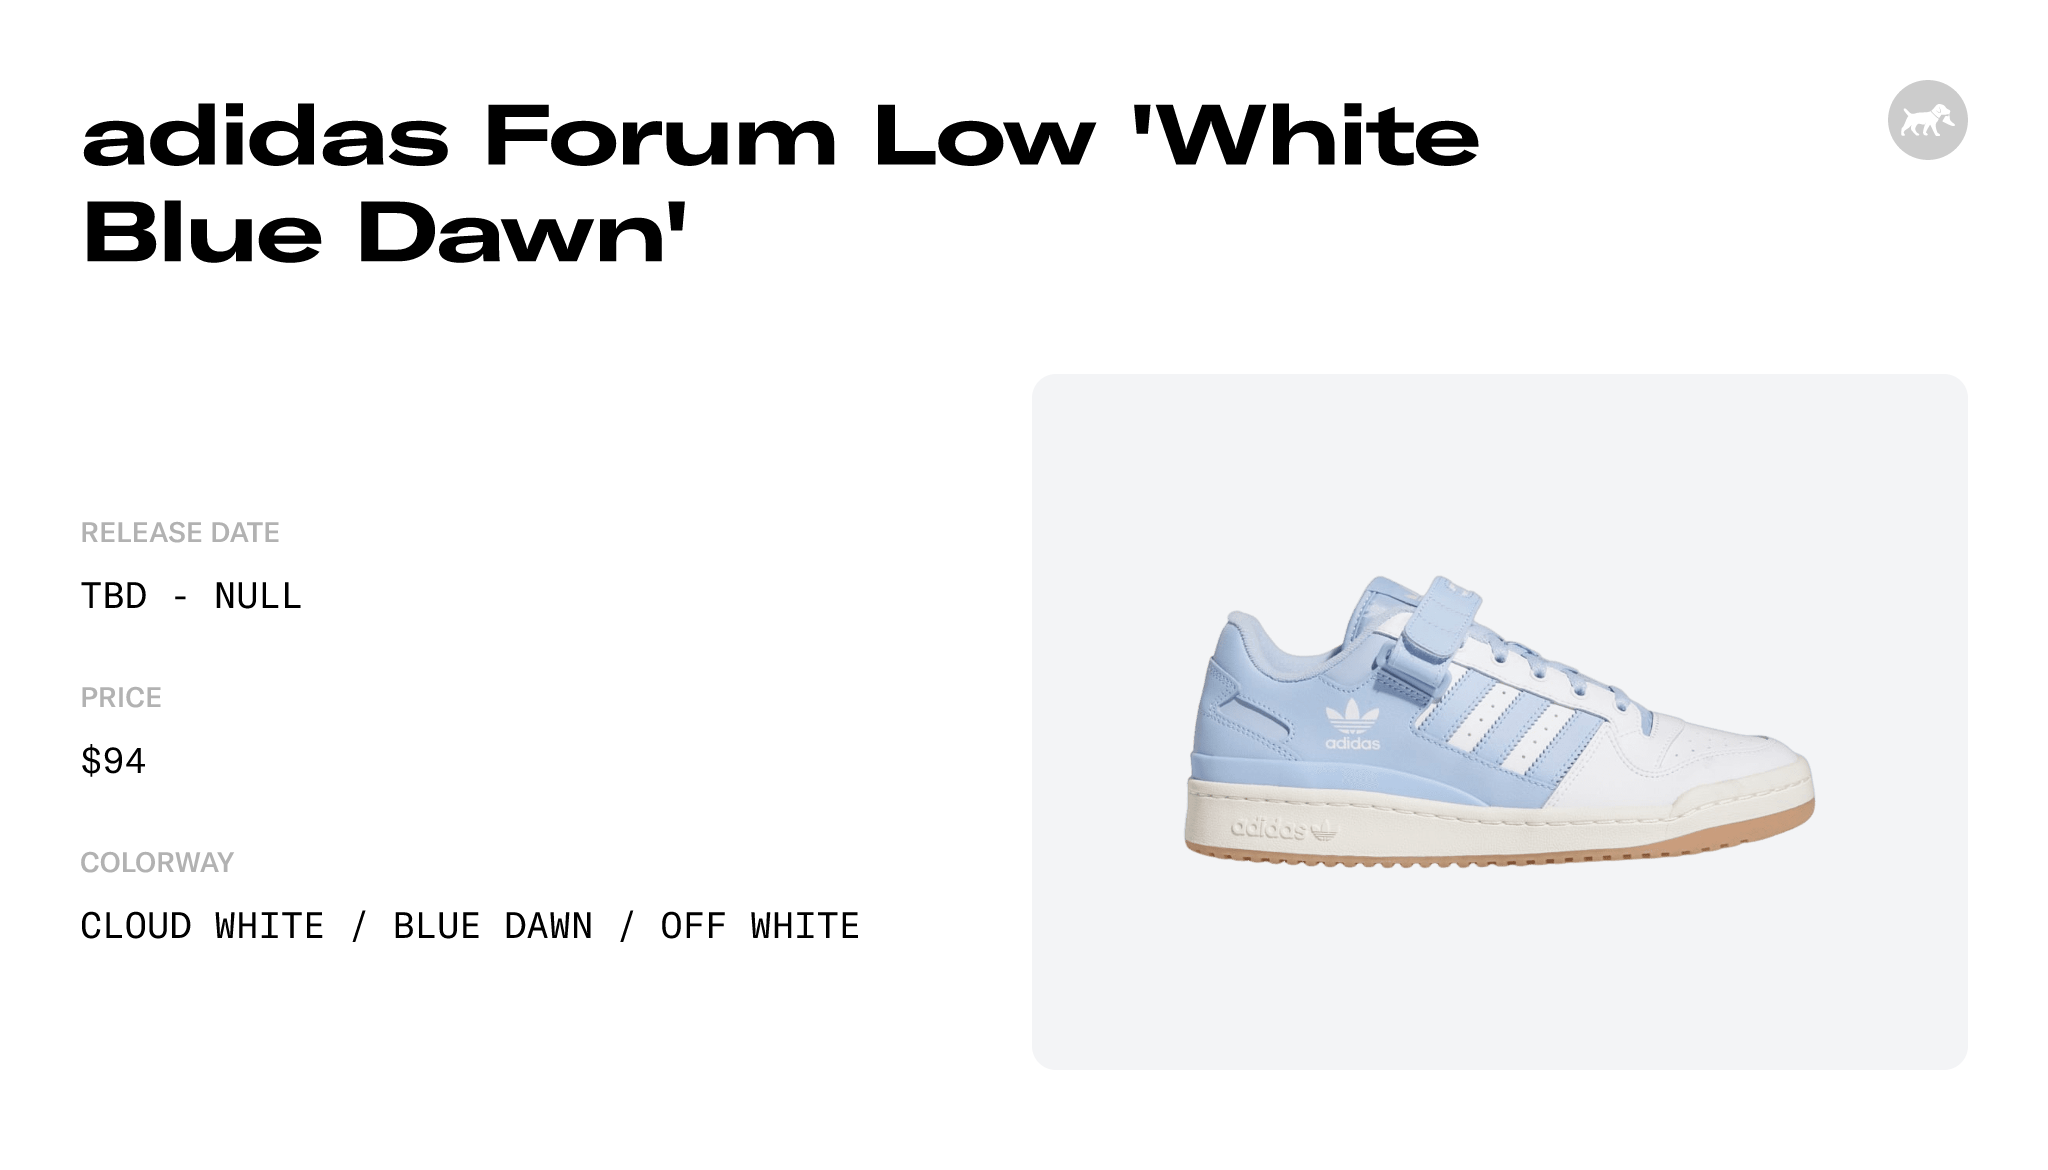 Date \'White Raffles and GY0003 Low Forum Blue - Release Dawn\' adidas